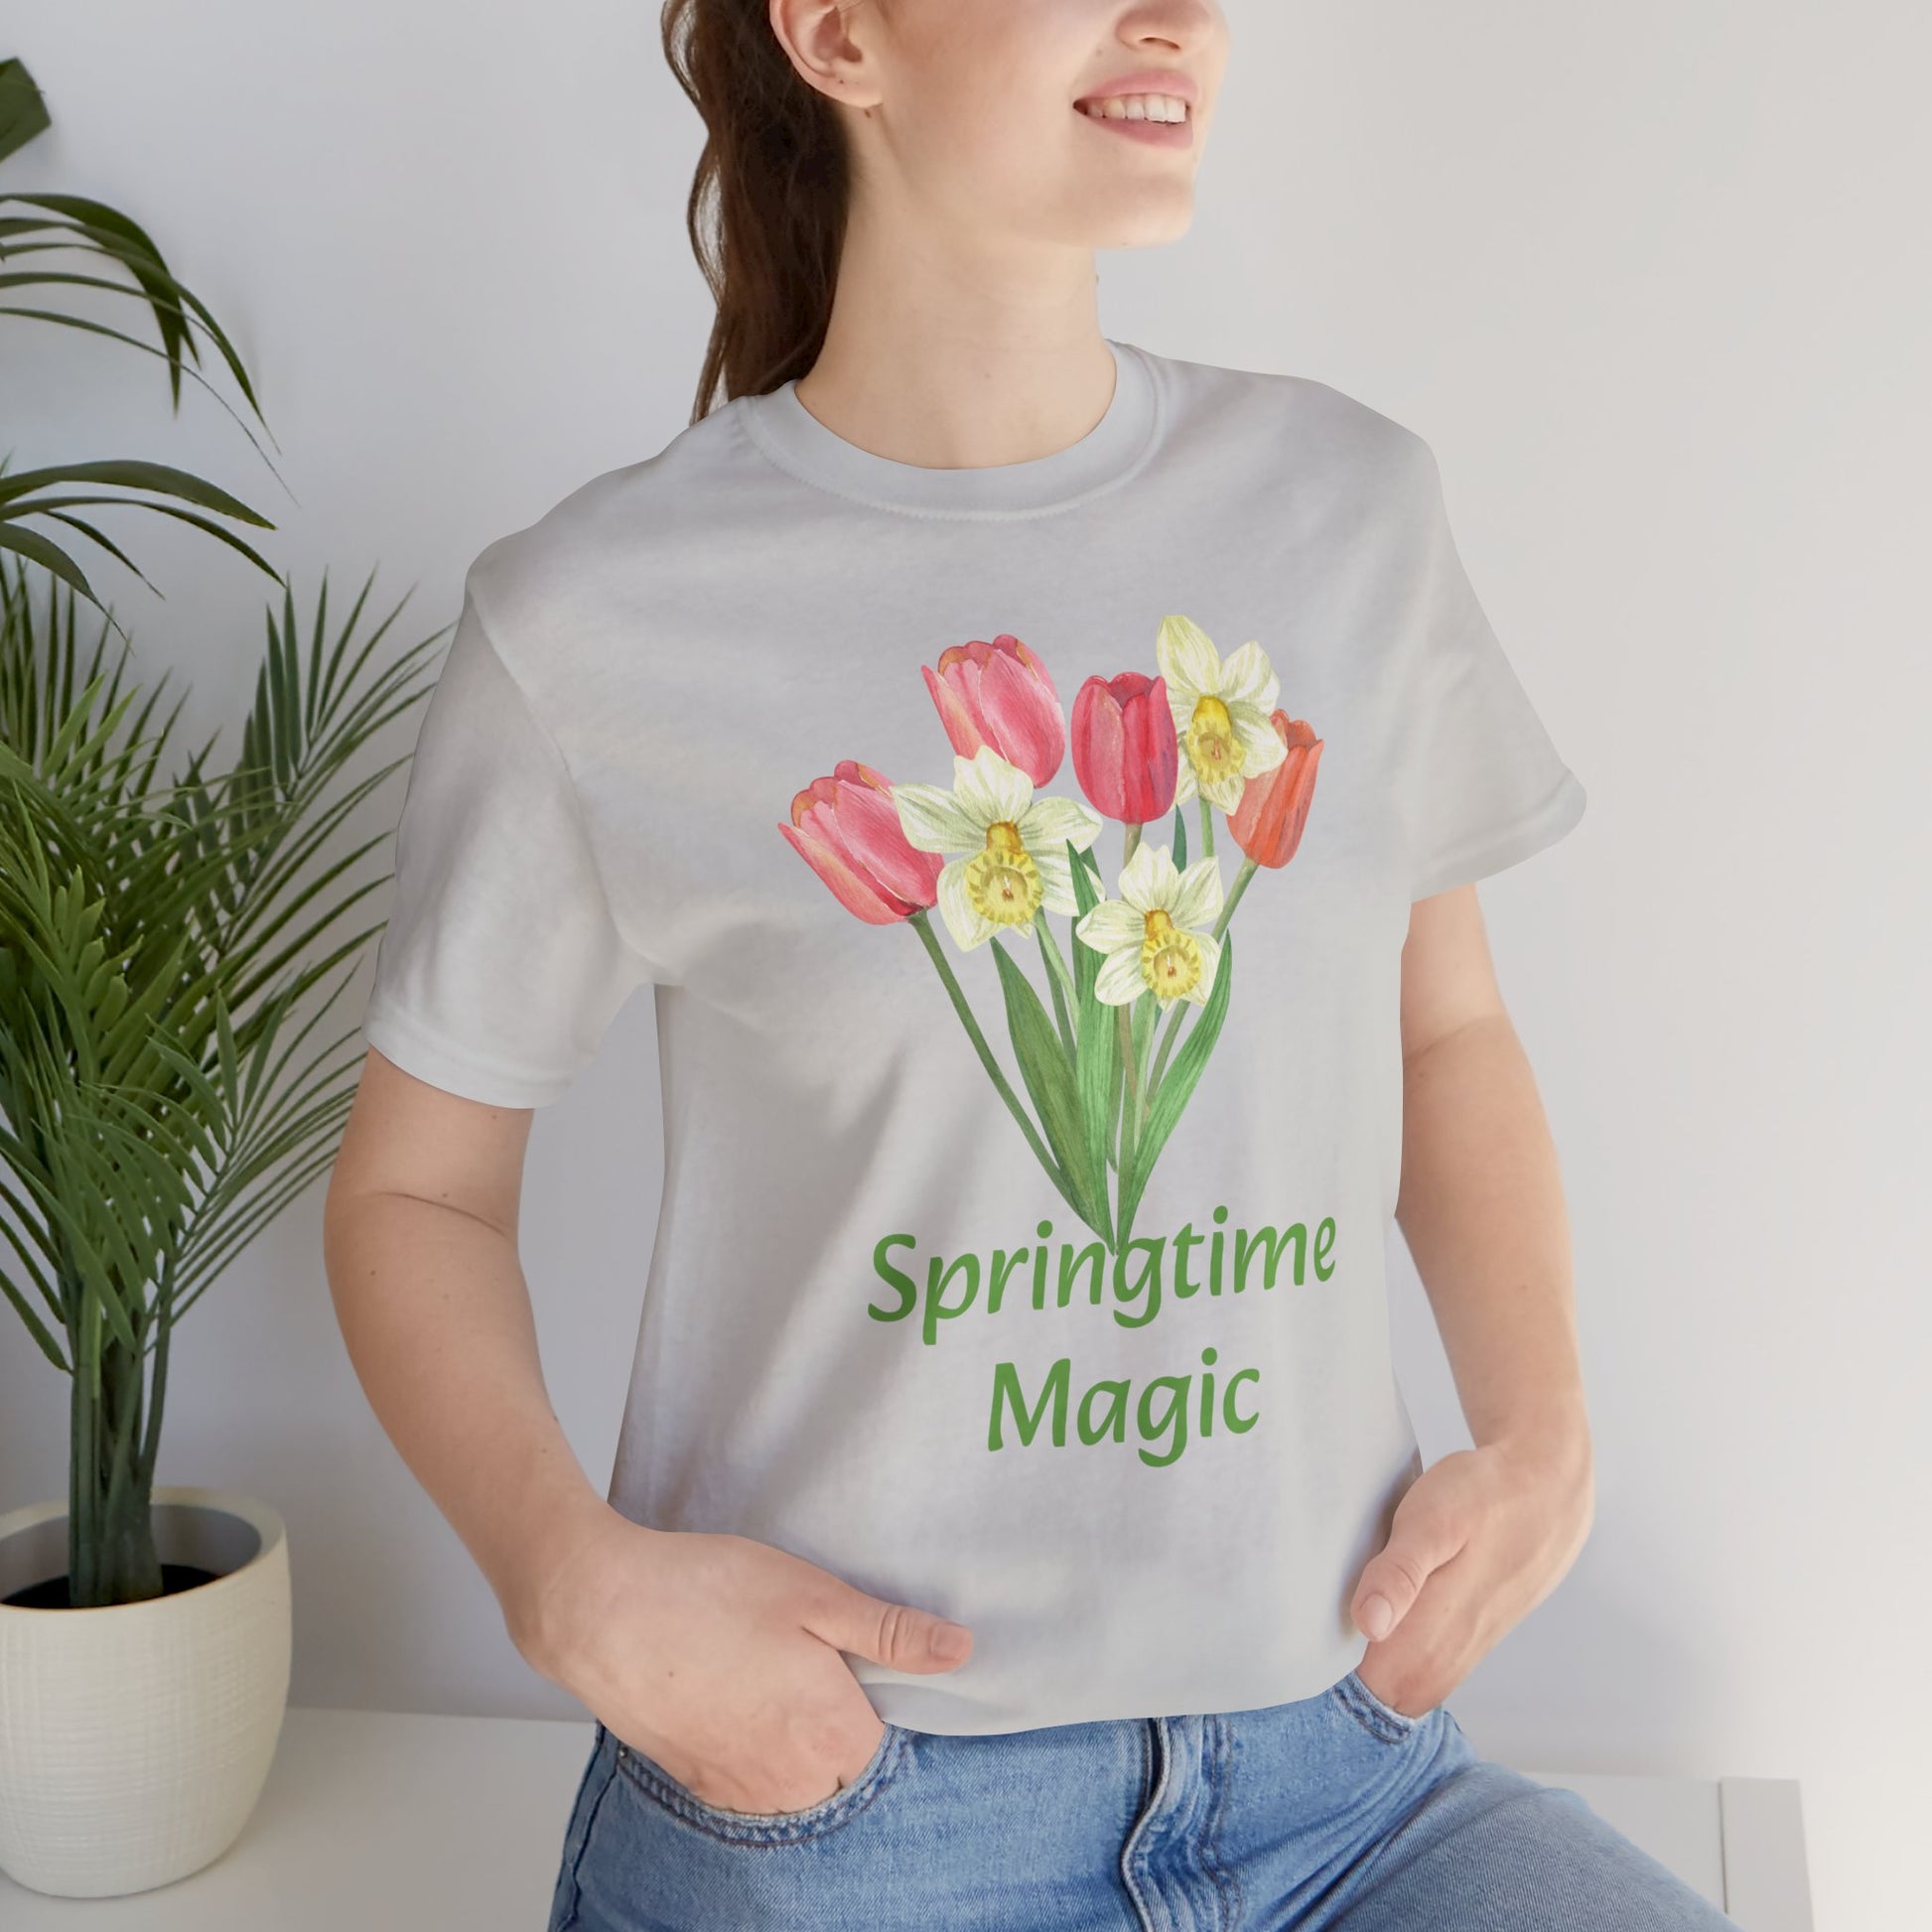 Woman wearing a gray Unisex Springtime-Magic T-shirt made of cotton by Bella + Canvas, with a floral print design.